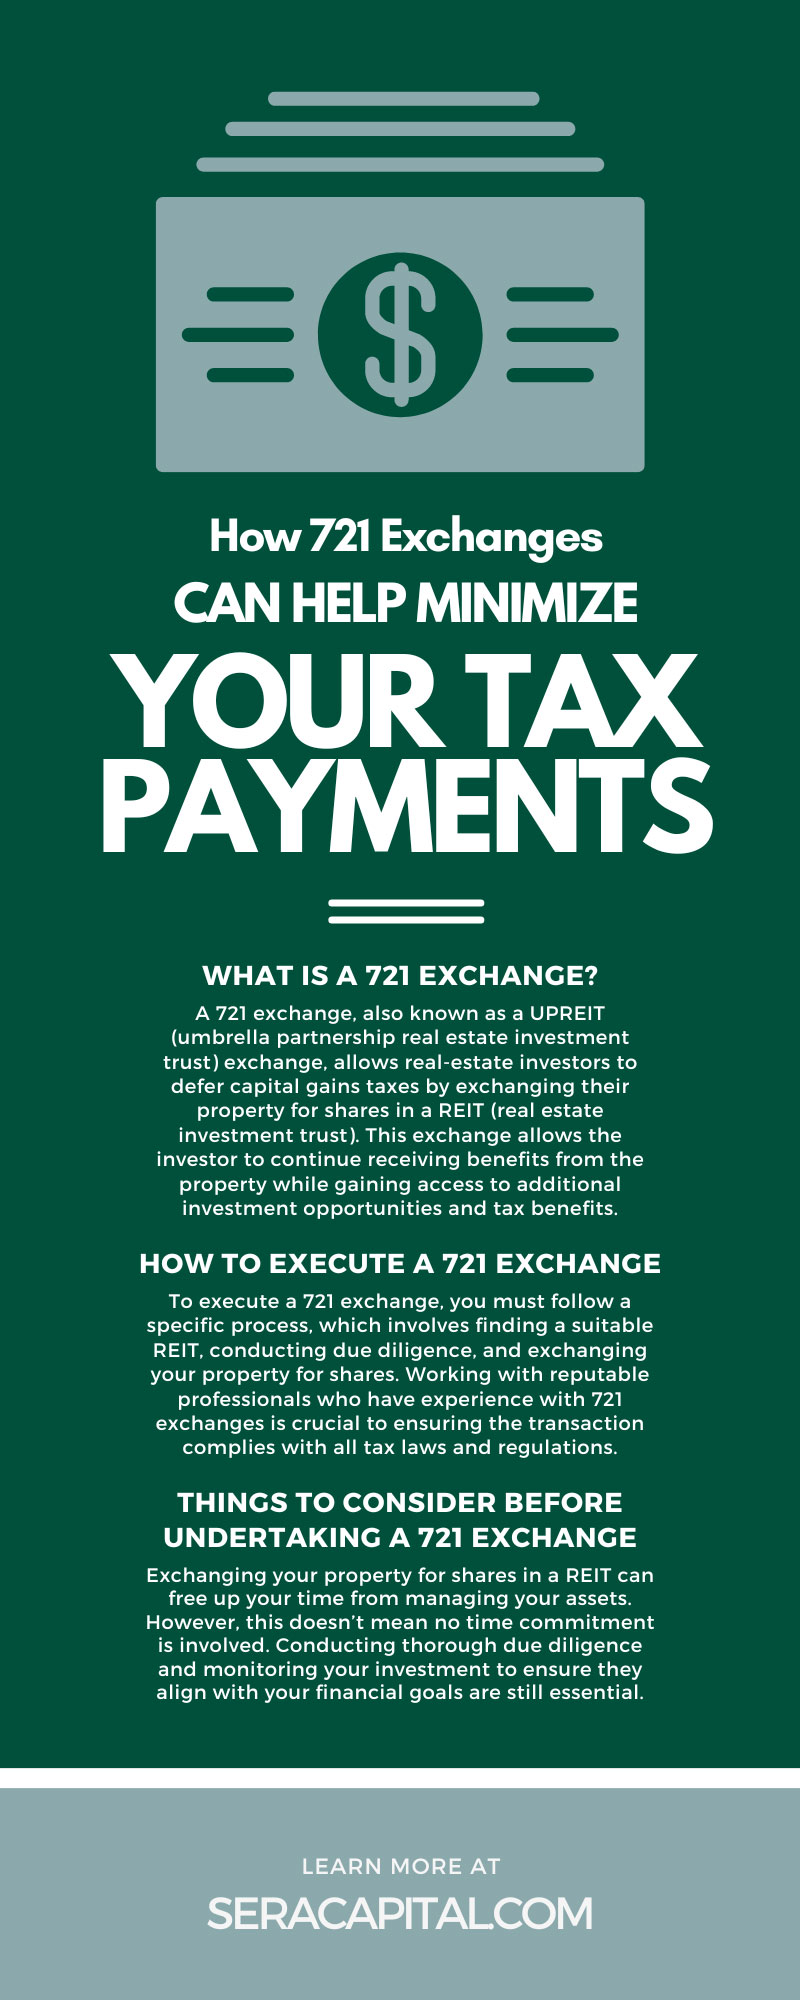 How 721 Exchanges Can Help Minimize Your Tax Payments